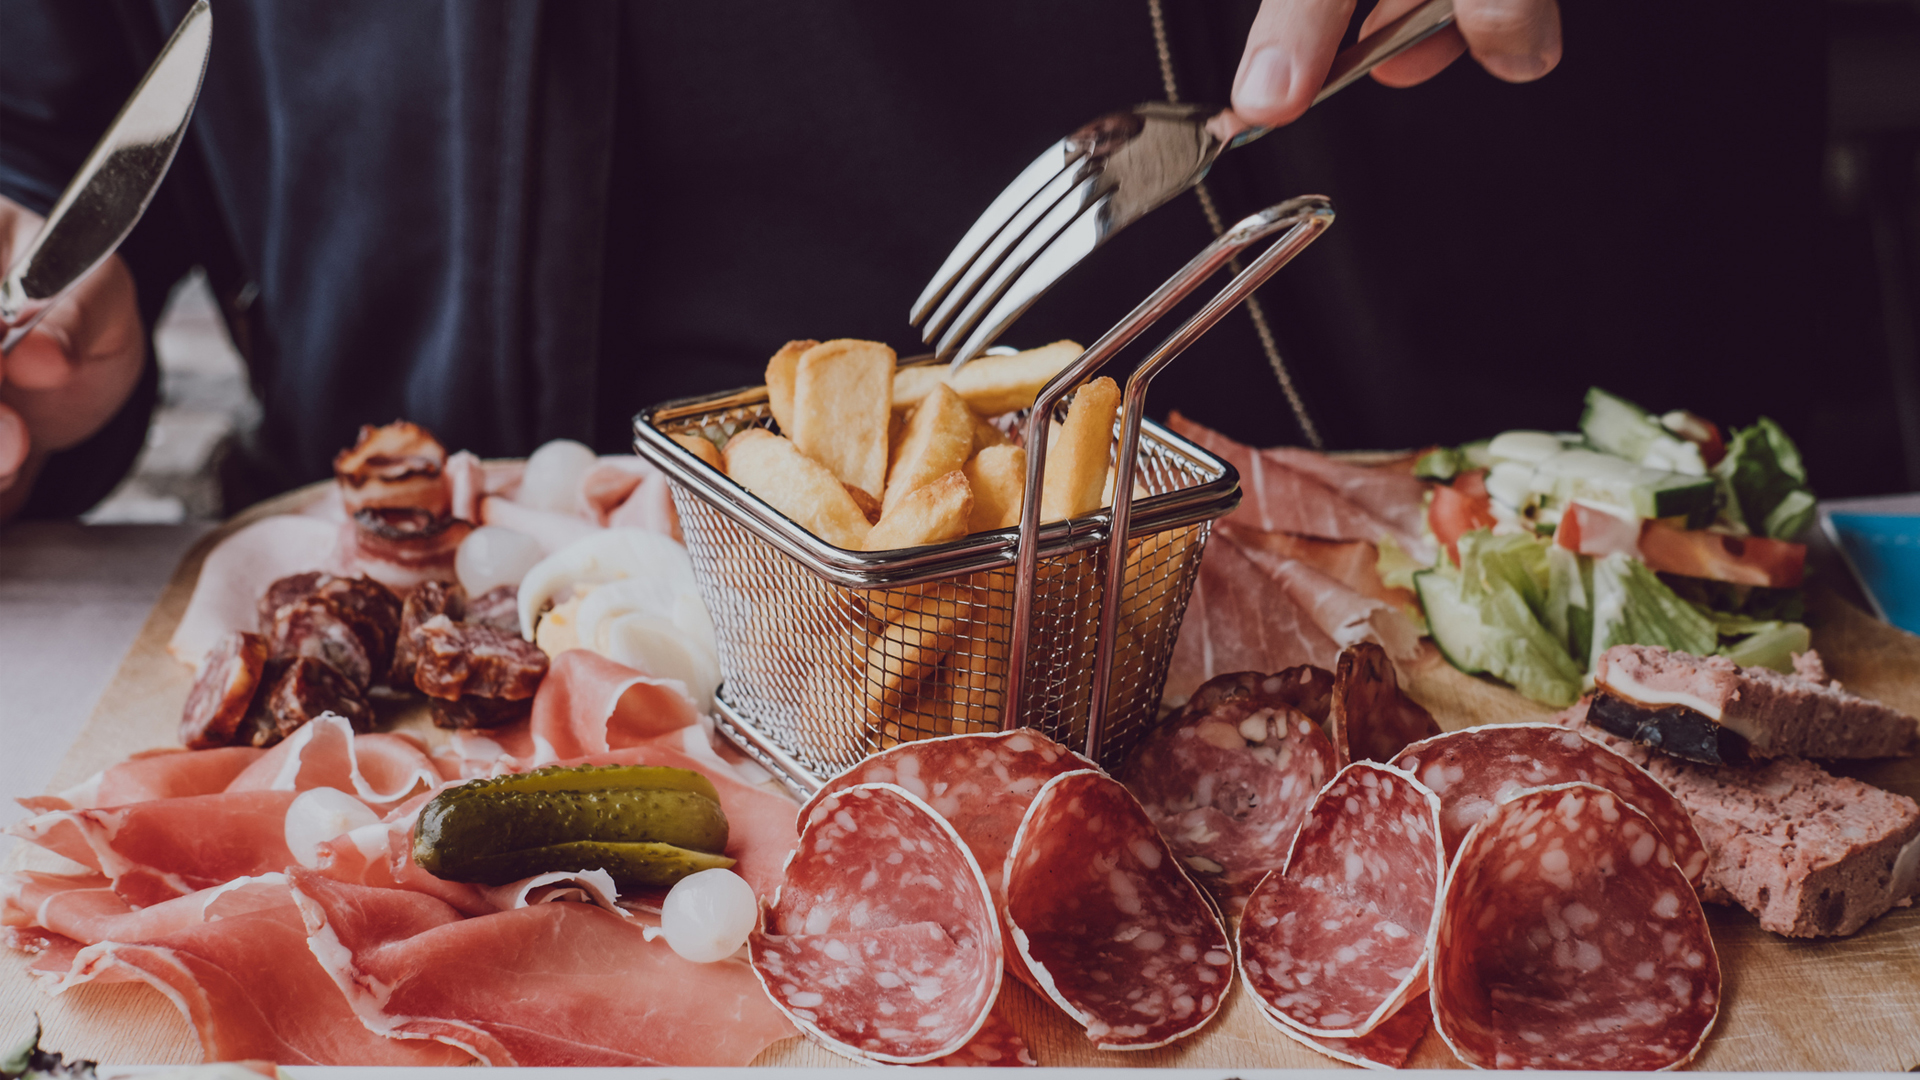 man eating a plate of cured meats and fries